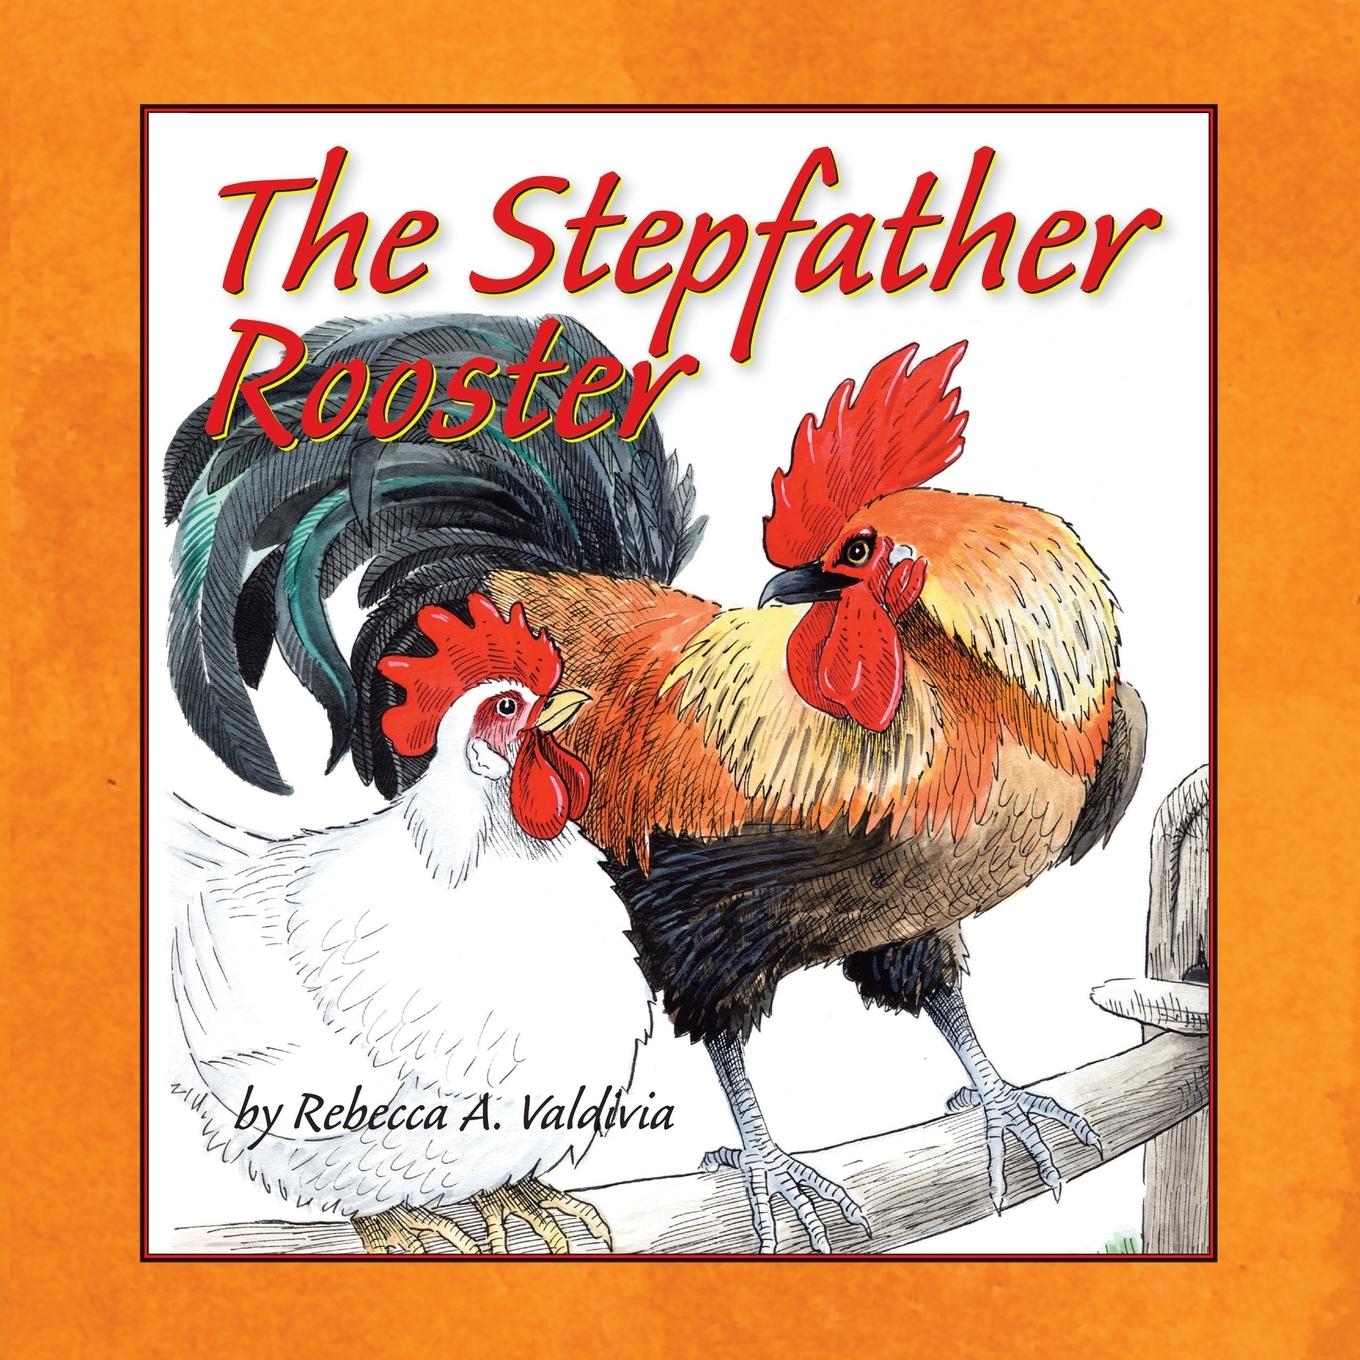 The Stepfather Rooster - Valdivia, Rebecca A.